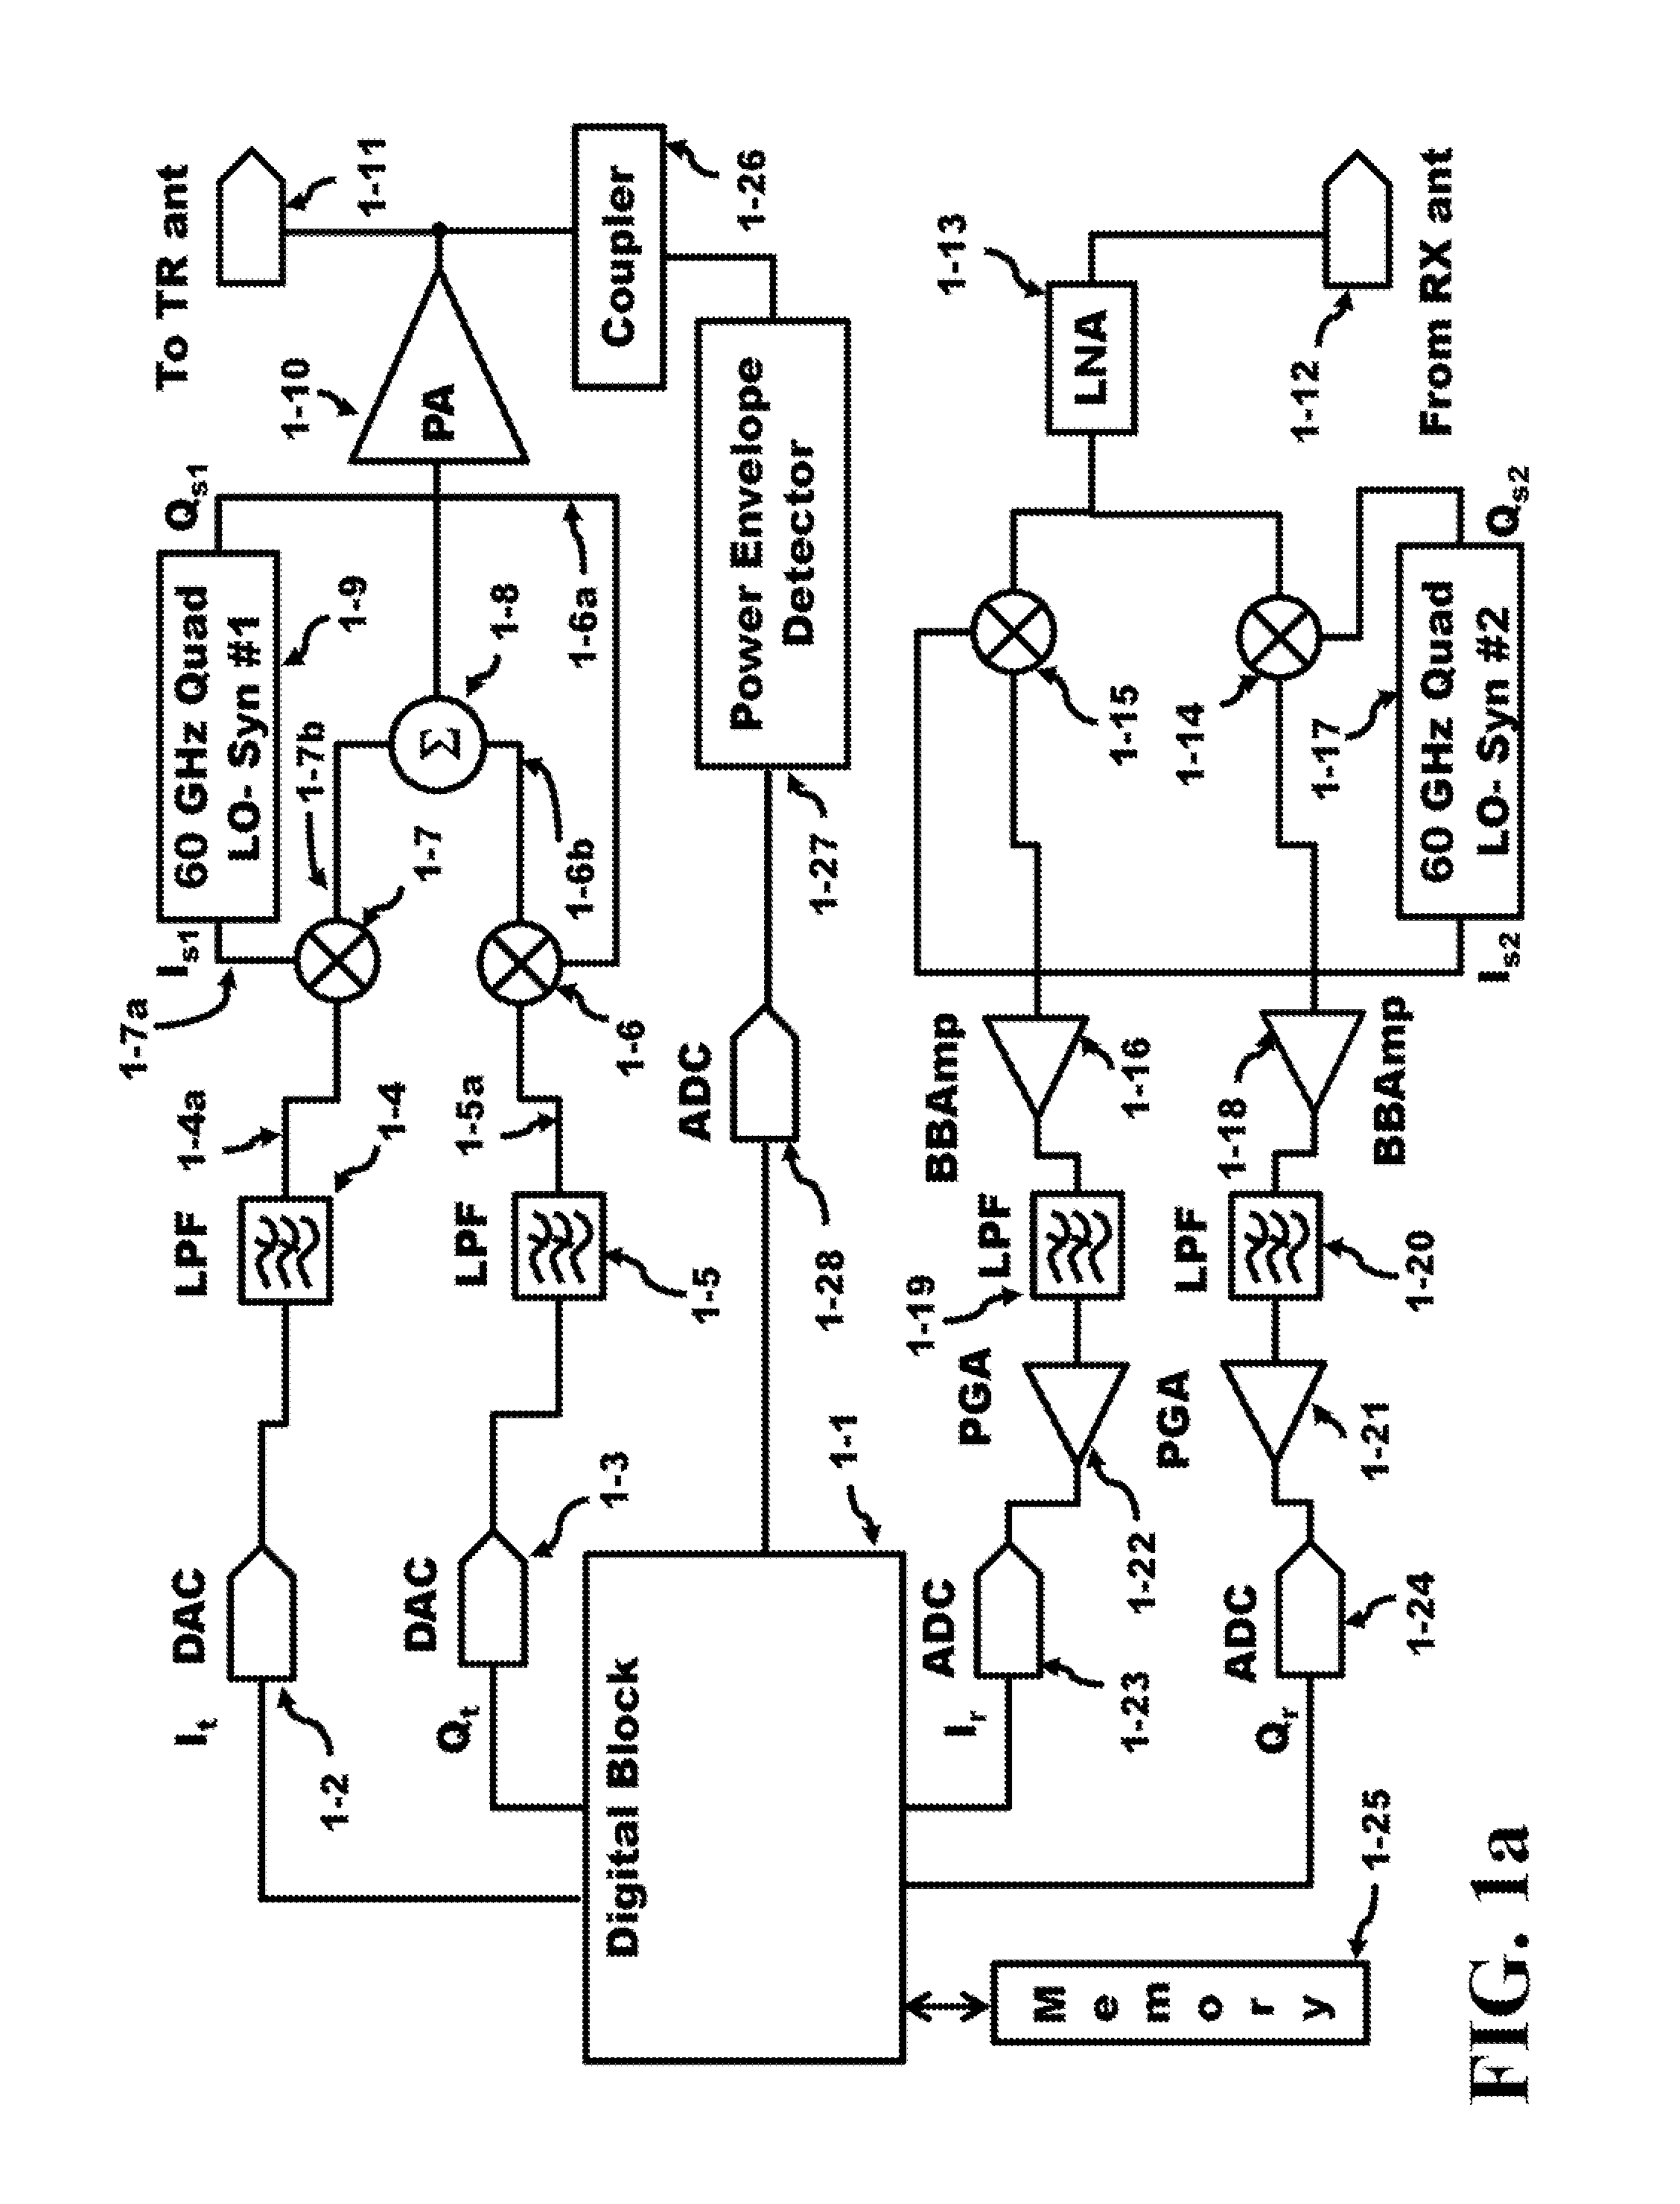 Method and Apparatus of Transceiver Calibration Using Substrate Coupling